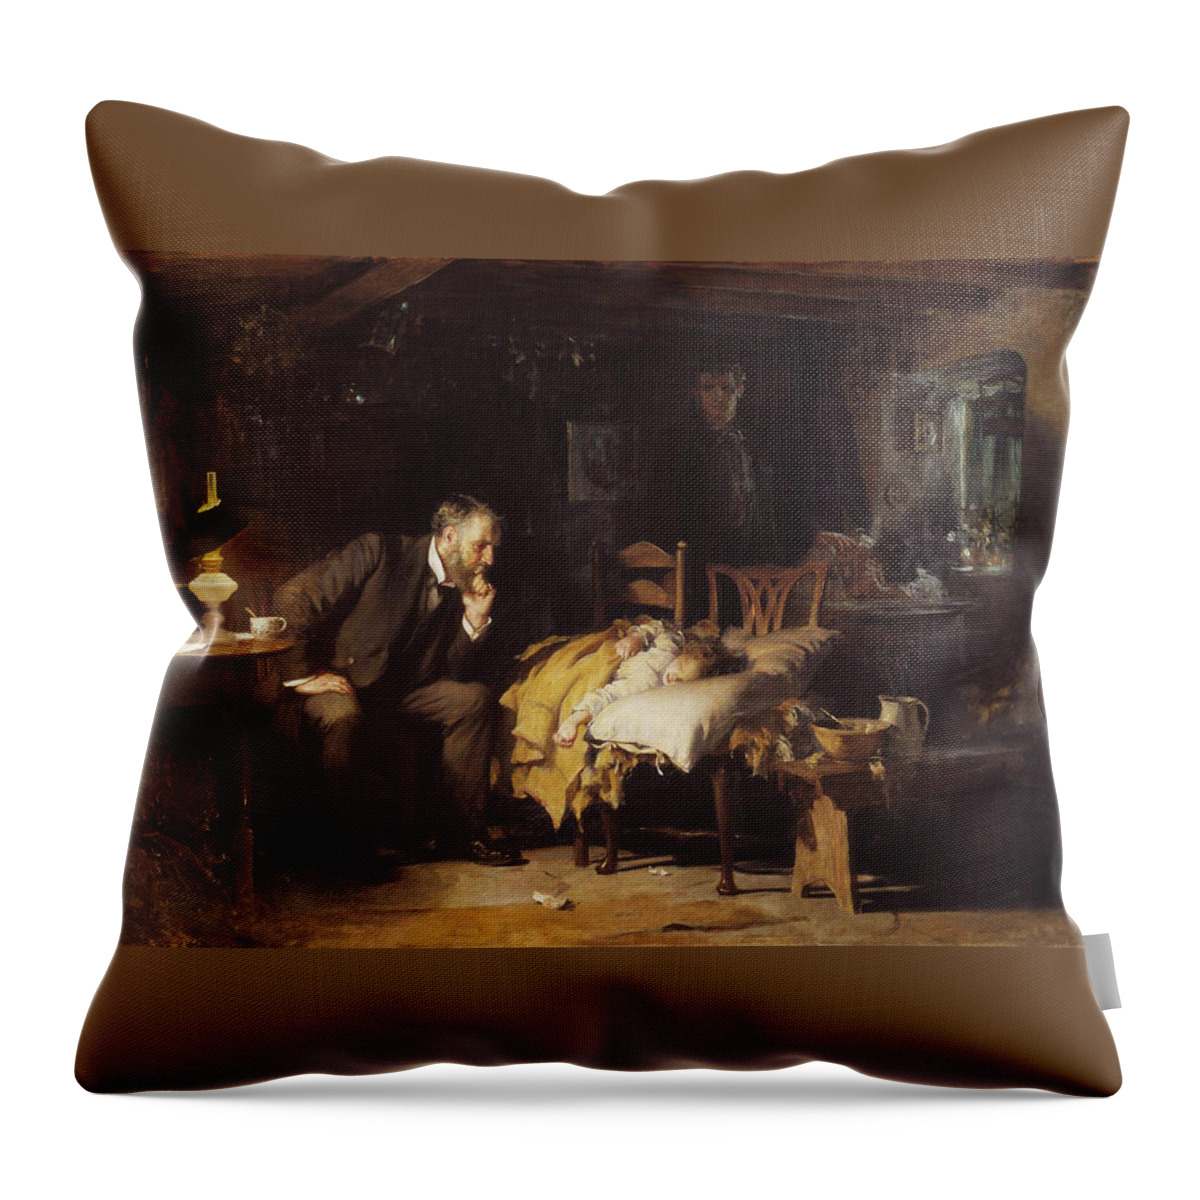 Sir Luke Fildes - The Doctor 1891 Throw Pillow featuring the painting The Doctor by MotionAge Designs